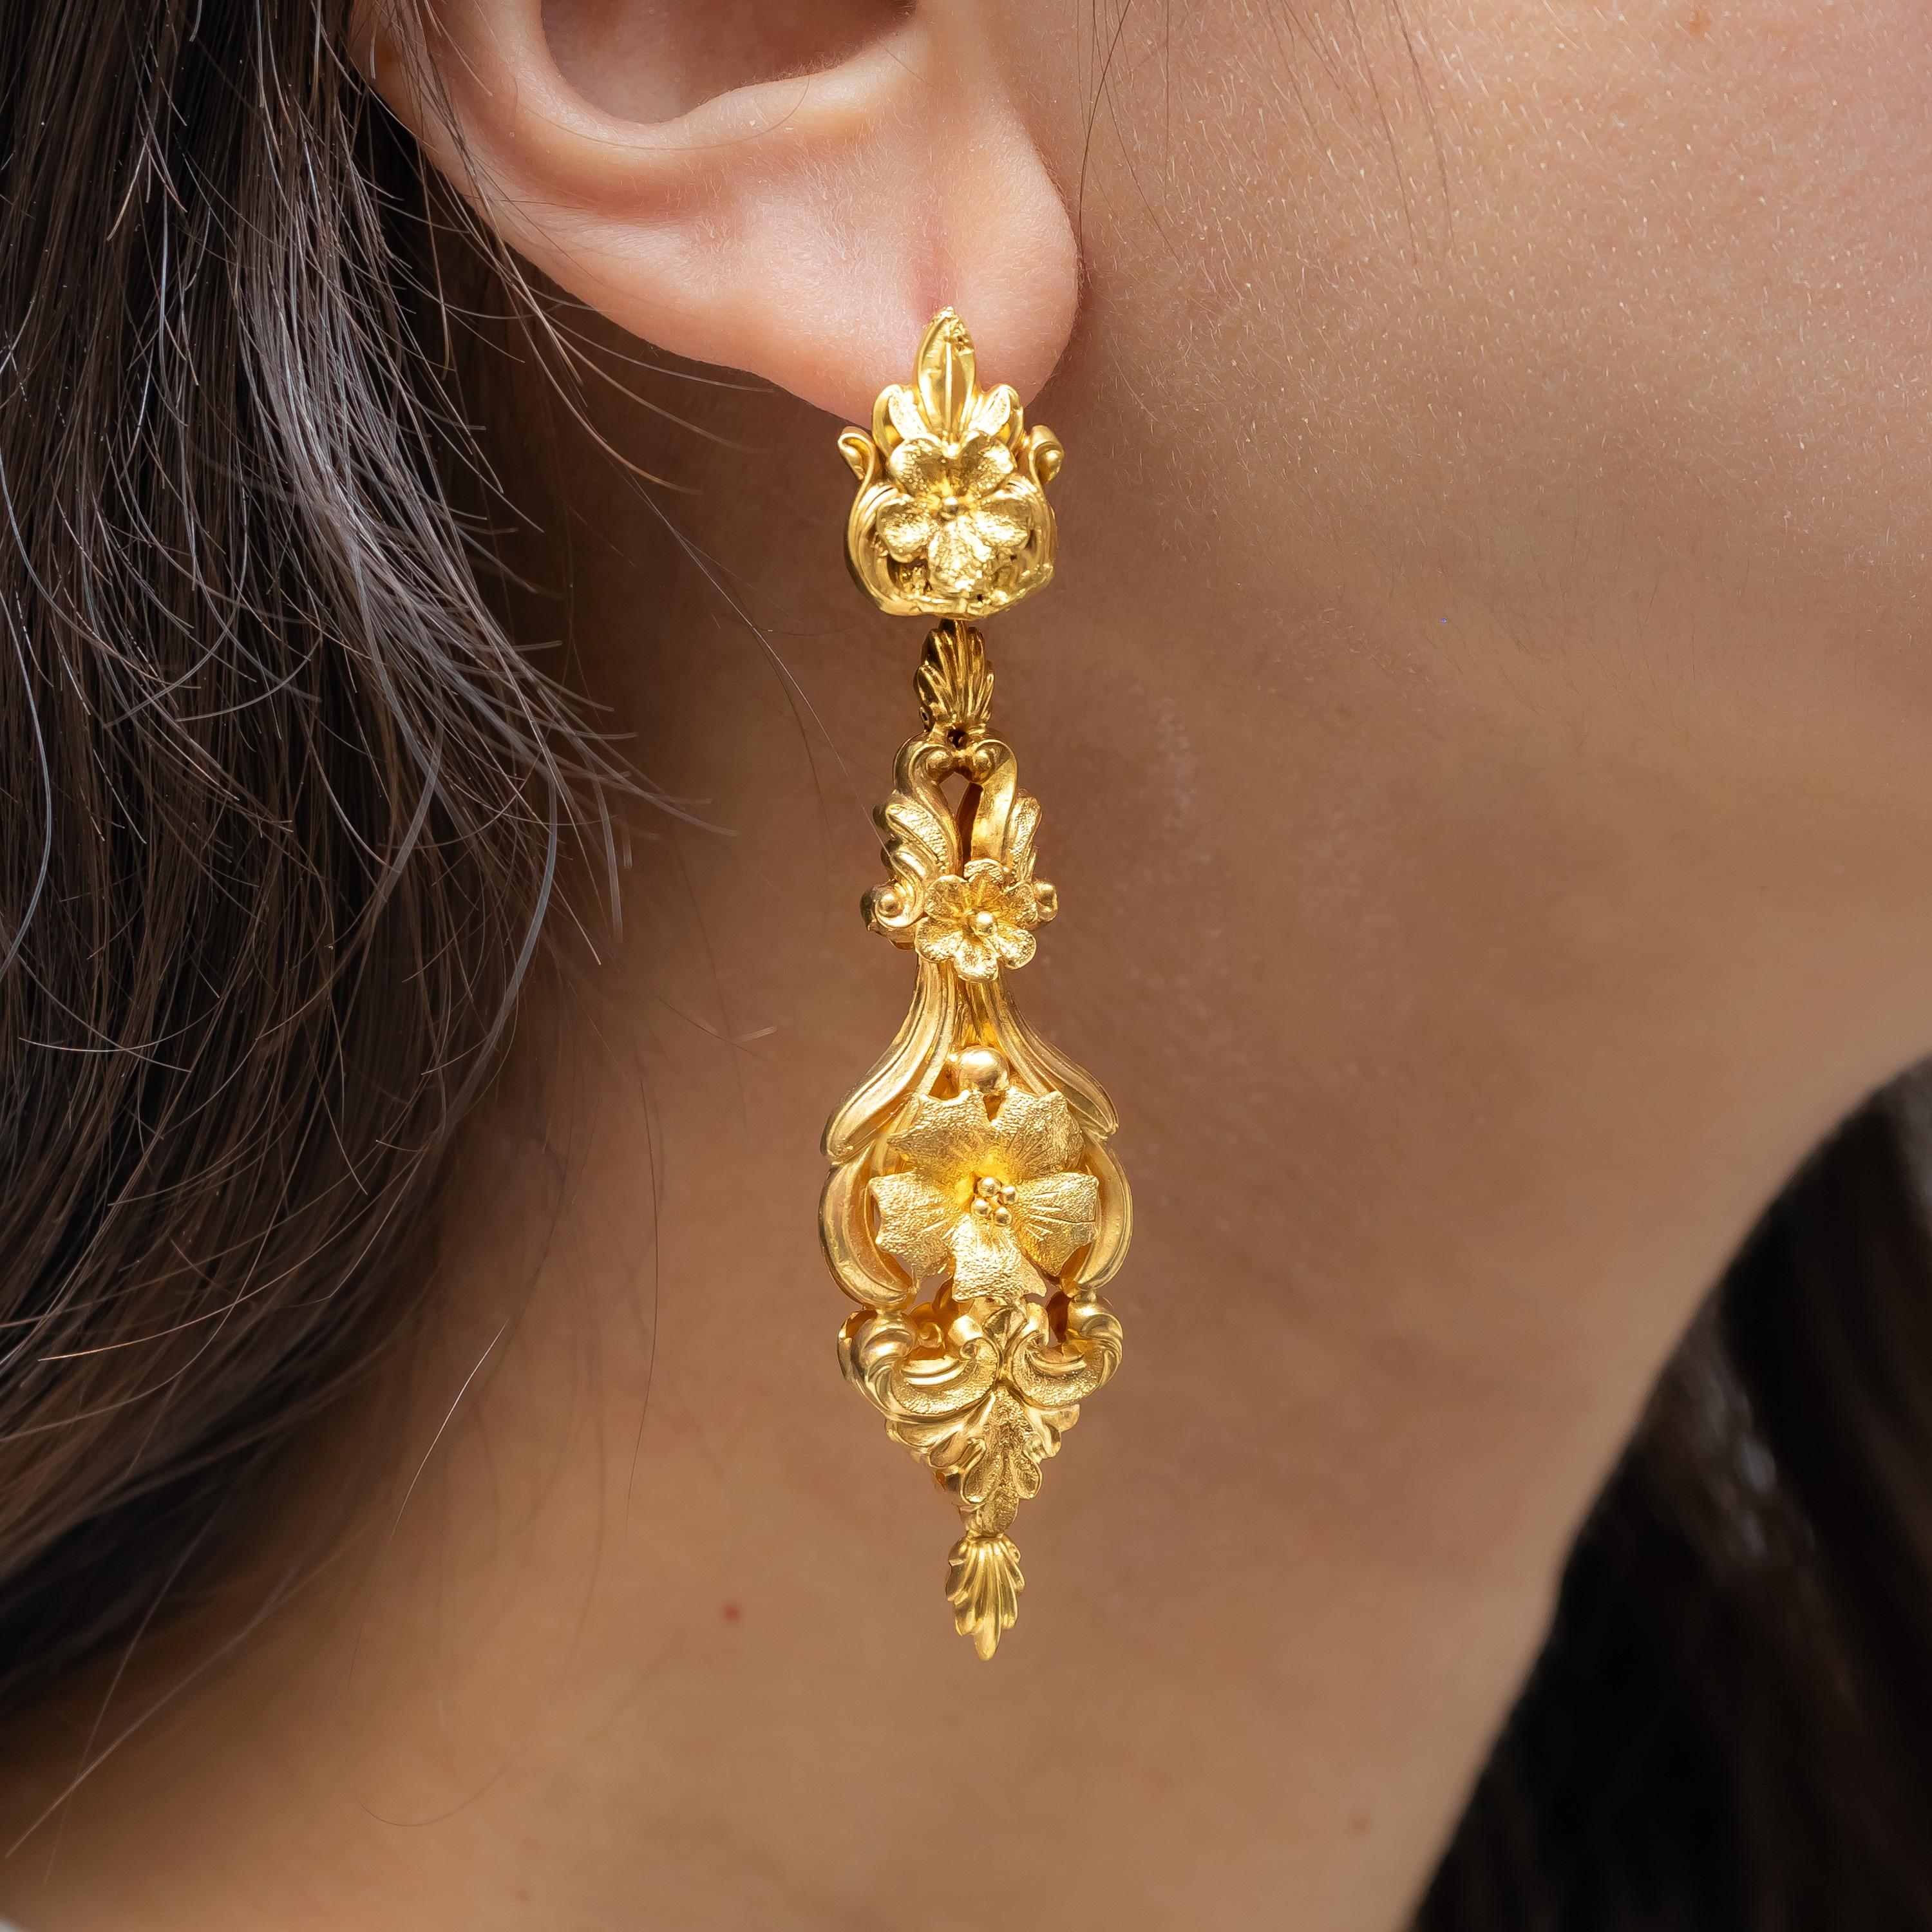 A pair of Georgian gold drop earrings, of scrolled floral and foliate design, with reversible, removable pendants, with two different designs, on floral tops, with hooks that open at the top, mounted in 18ct gold, English, circa 1820.